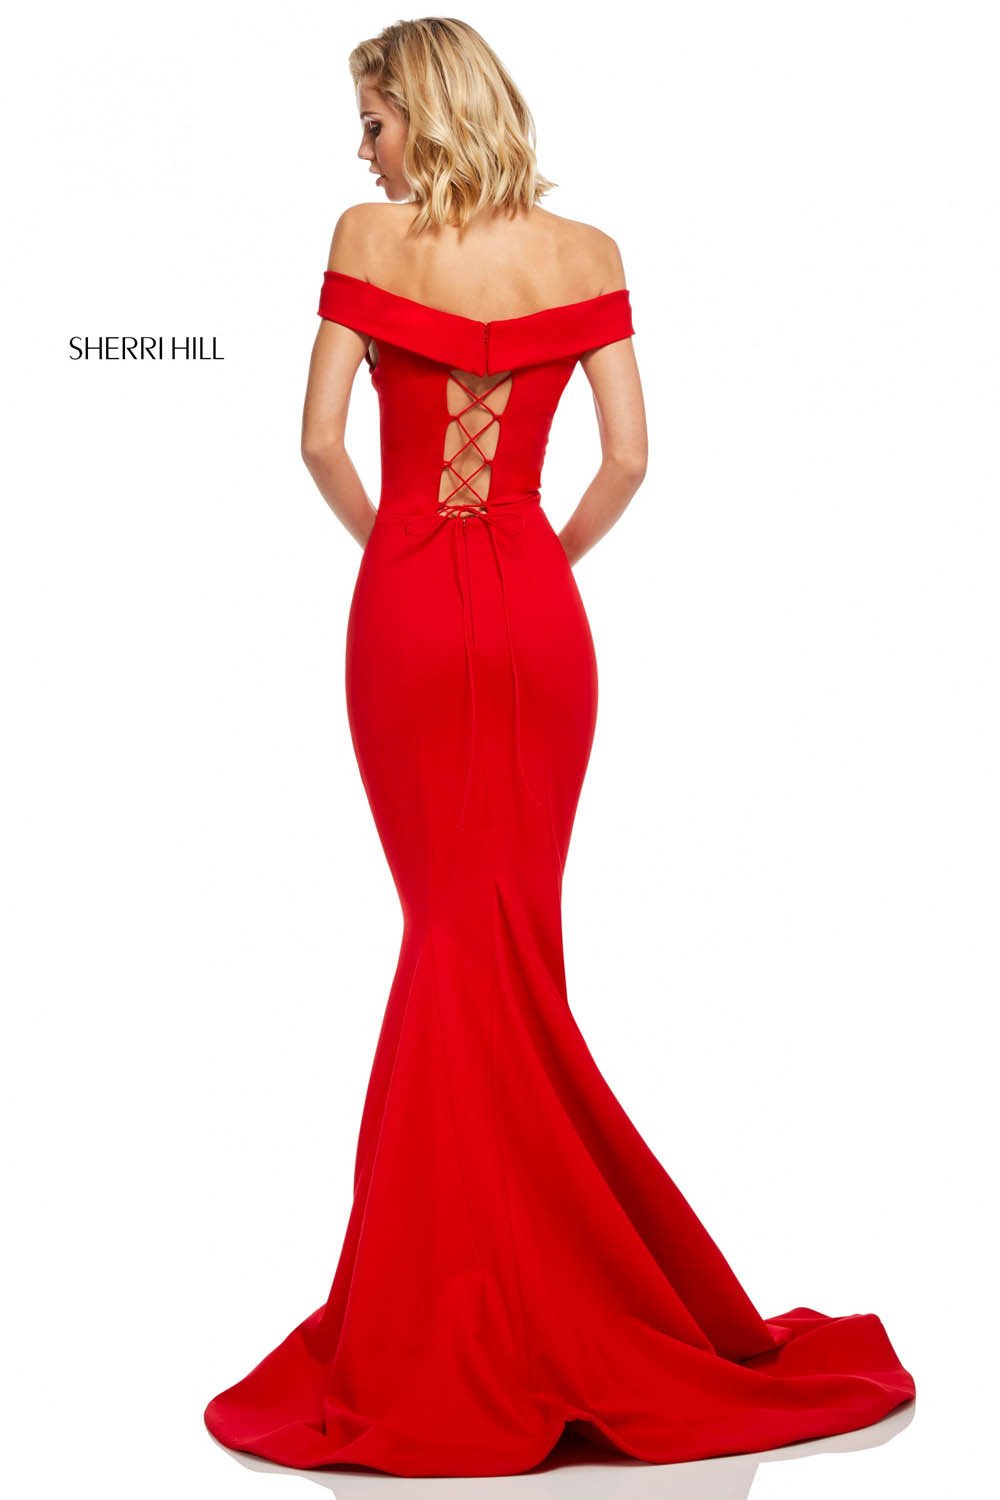 Sherri Hill 52607 dress images in these colors: Black, Red, Navy, Wine, Emerald, Light Blue, Yellow, Ivory.